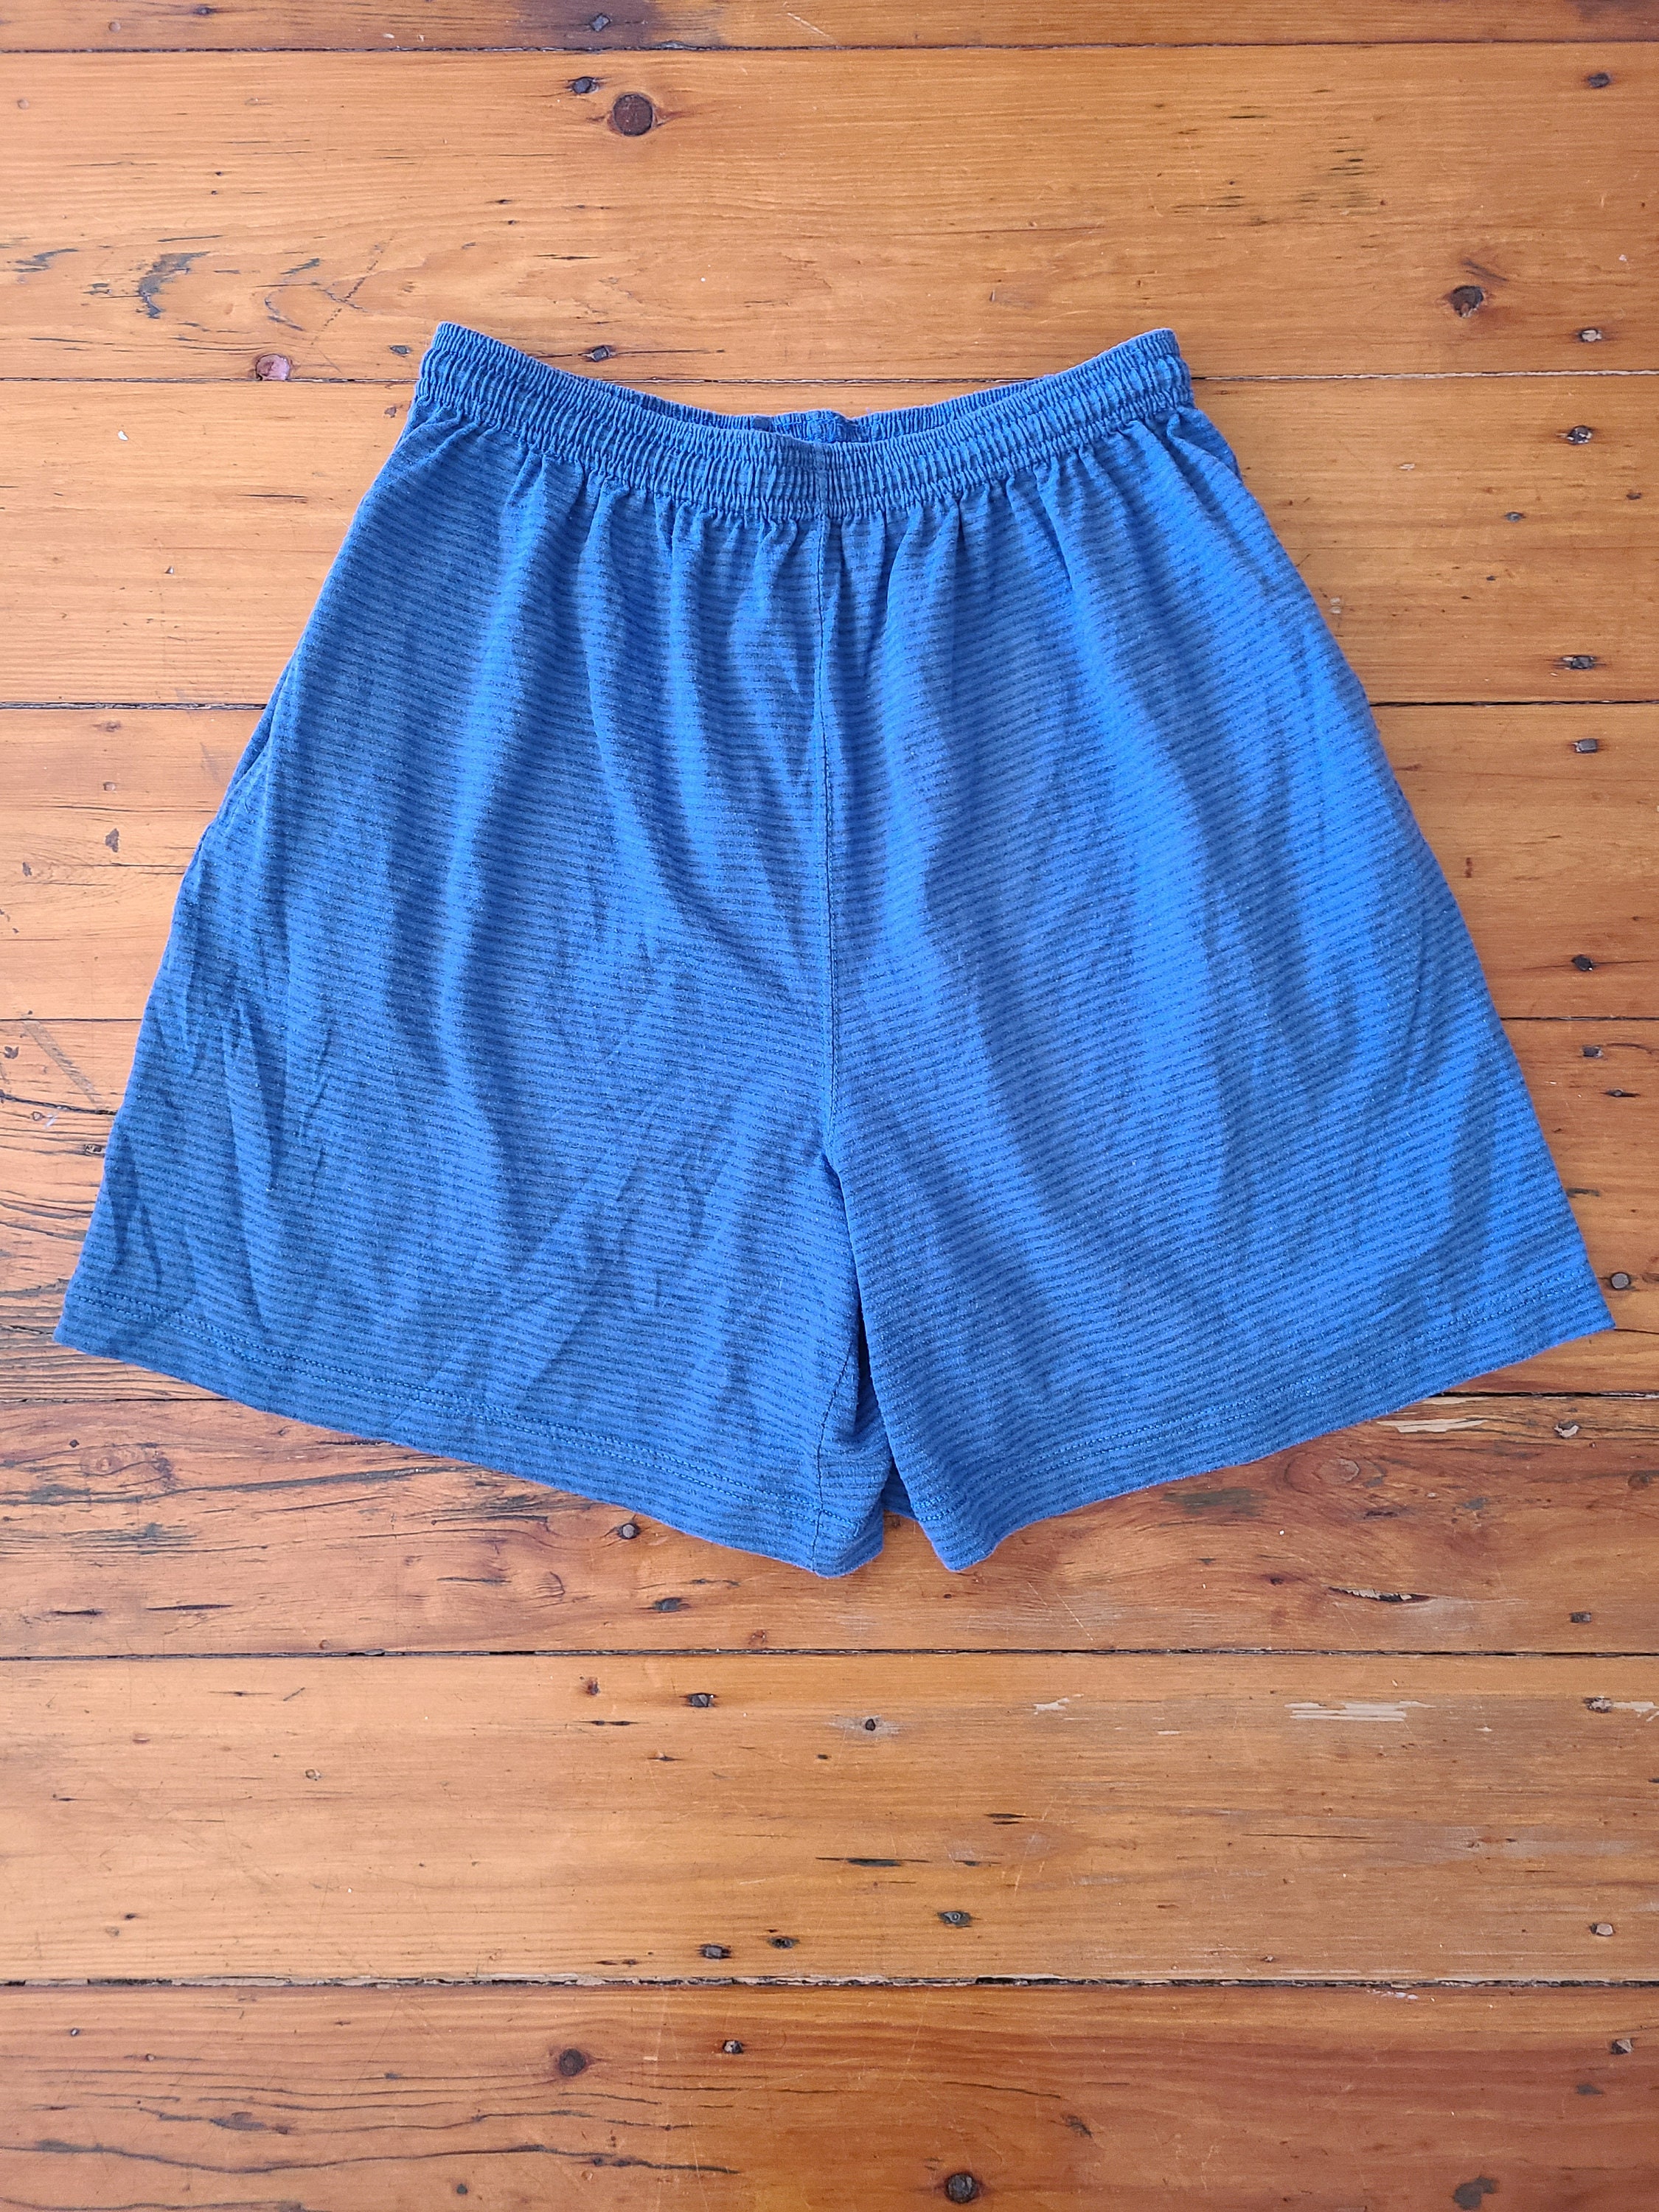 Vintage 90s Russell Athletic Cotton Shorts Sz L Made in USA 